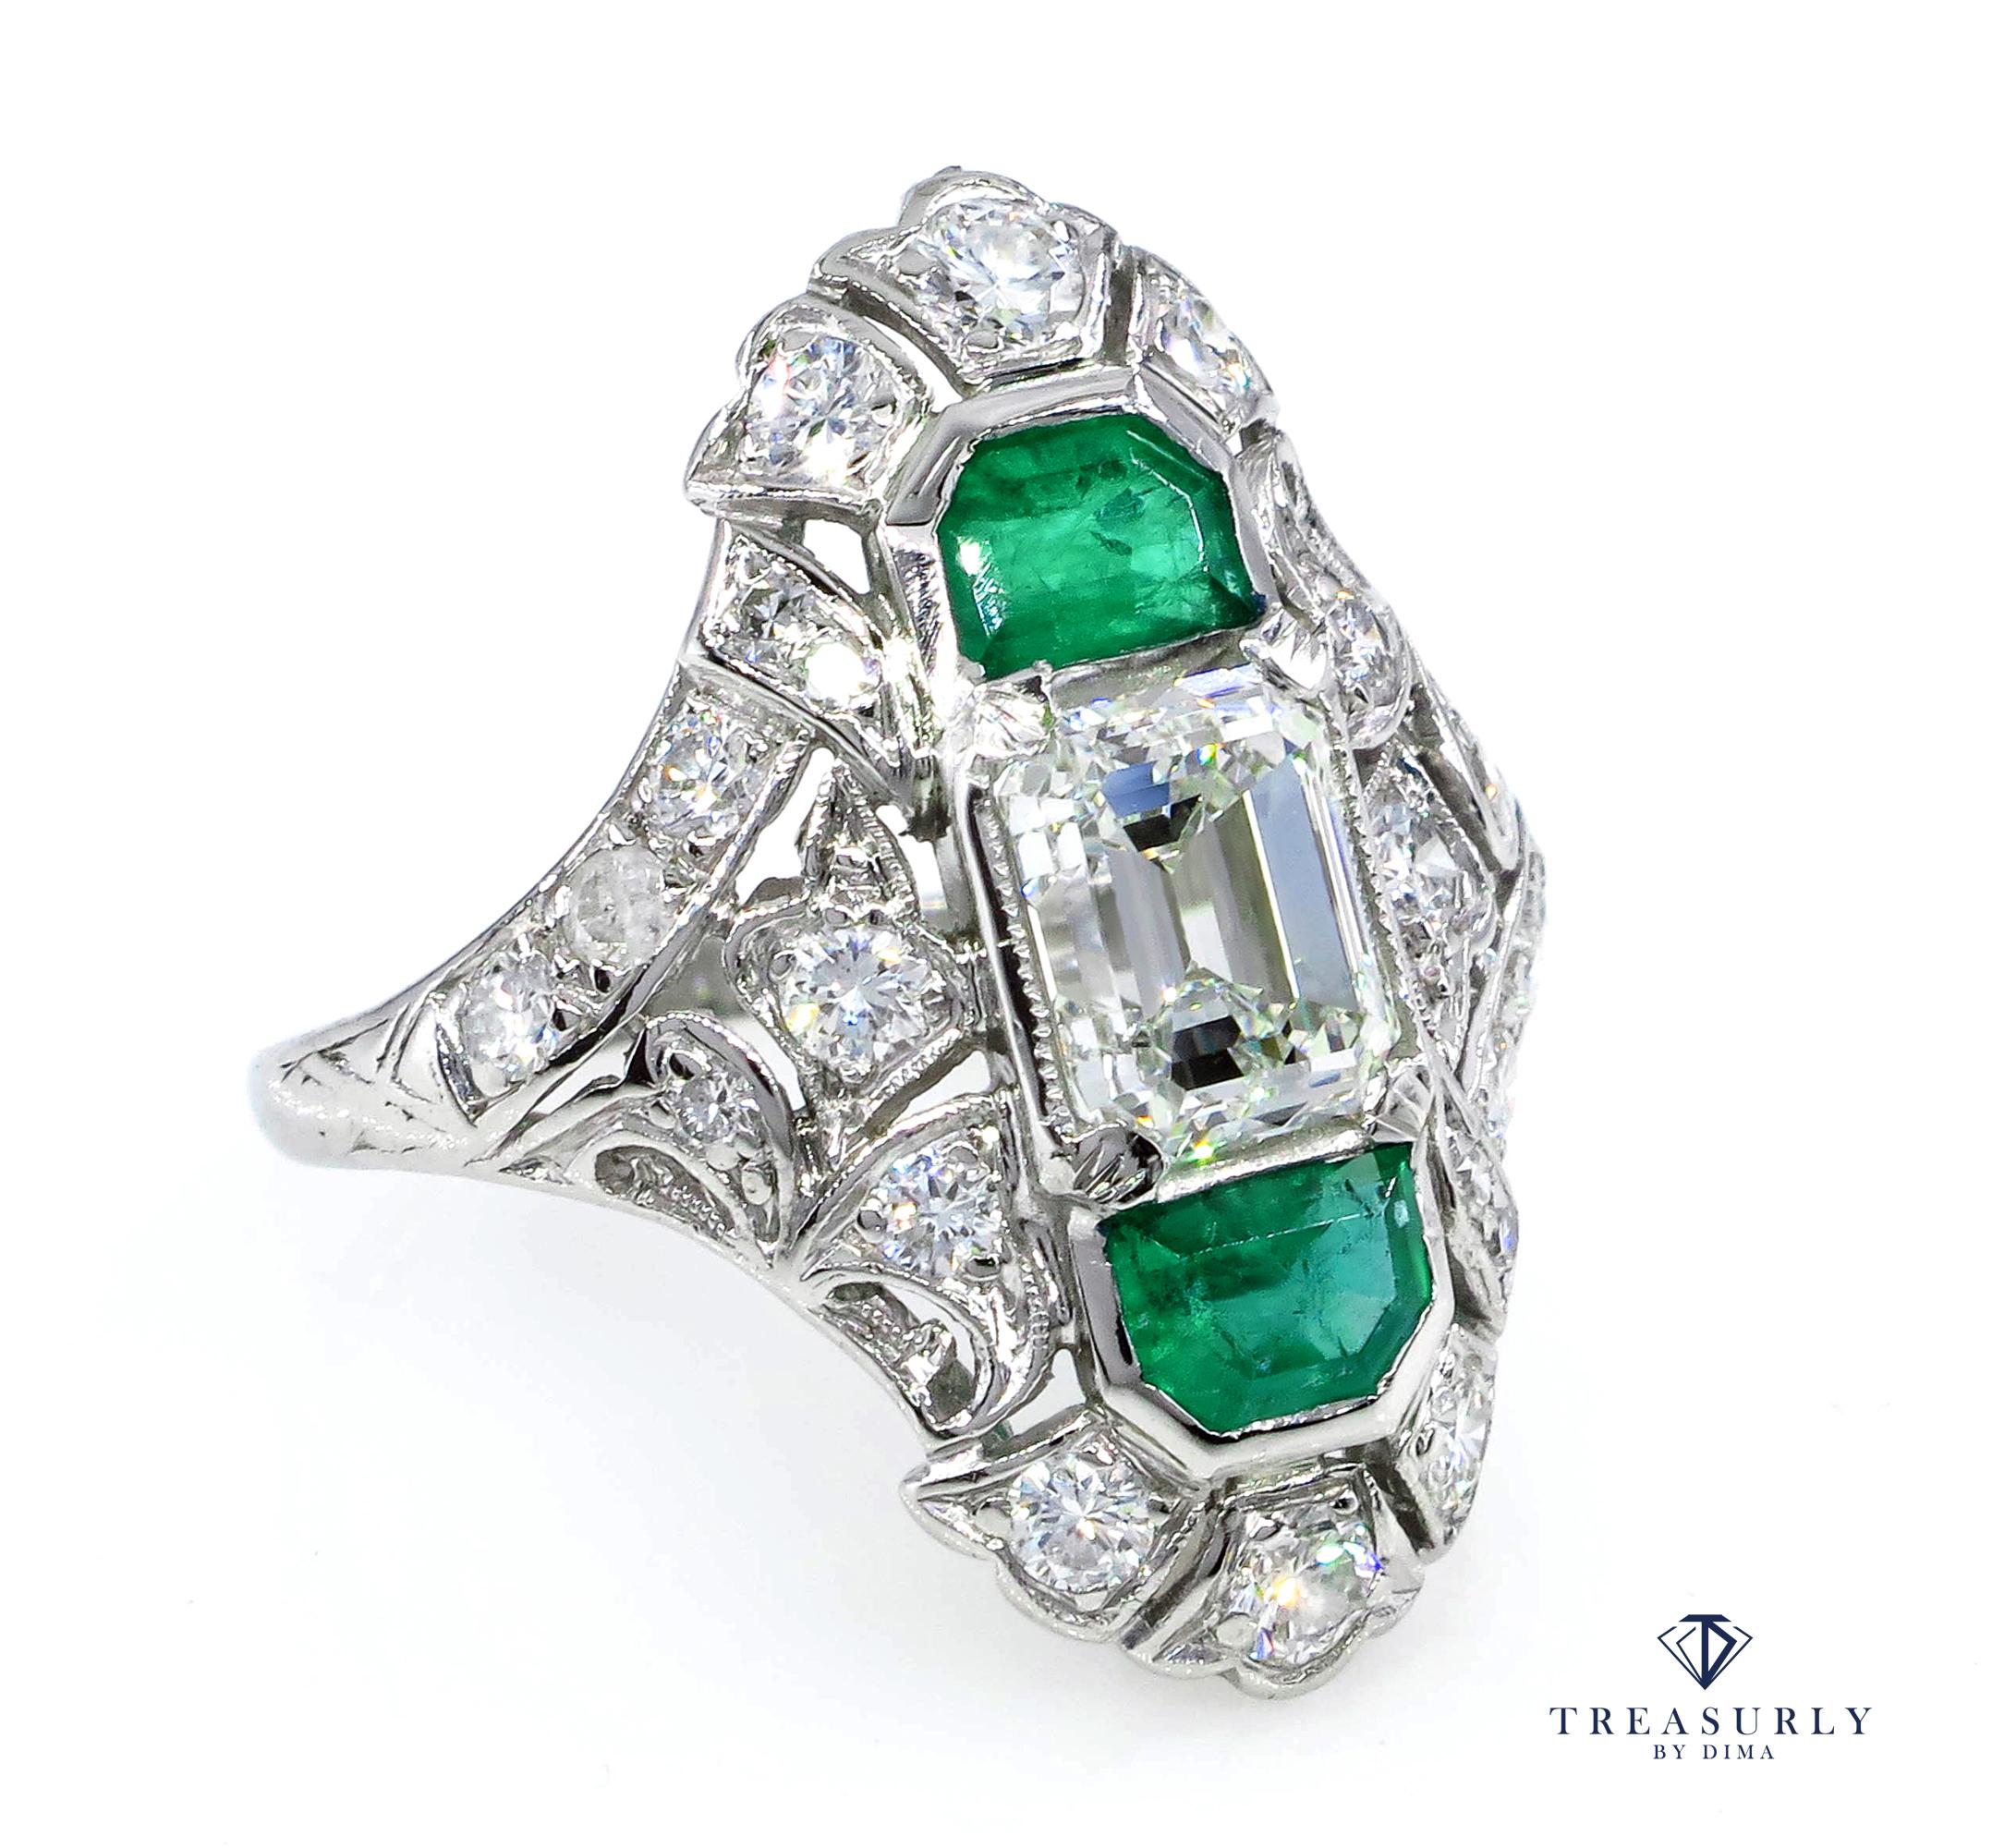 This precious and highly collectible, late Edwardian- to- early Art Deco jewel, in glorious green and white, represent some of the finest examples of diamond, platinum jewelry in existence , comes to us from the first decade of the twentieth